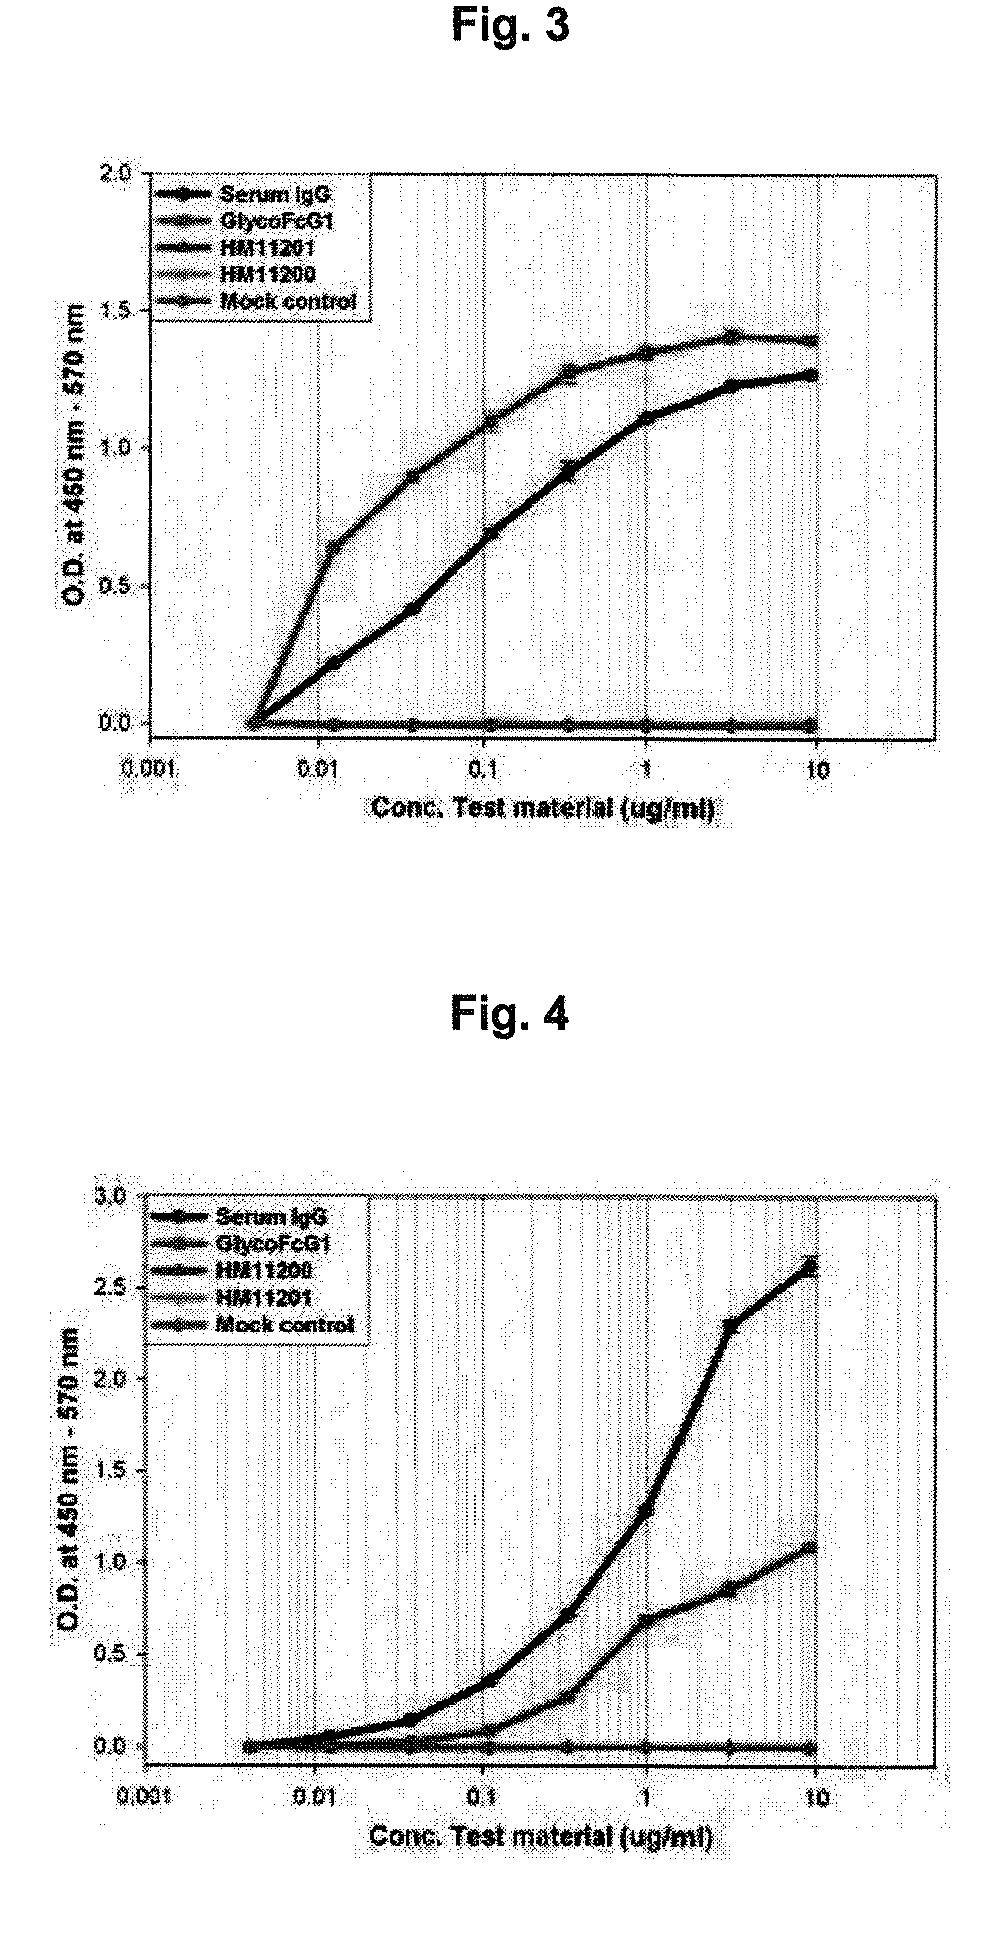 Method for the mass production of immunoglobulin Fc region deleted initial methionine residues